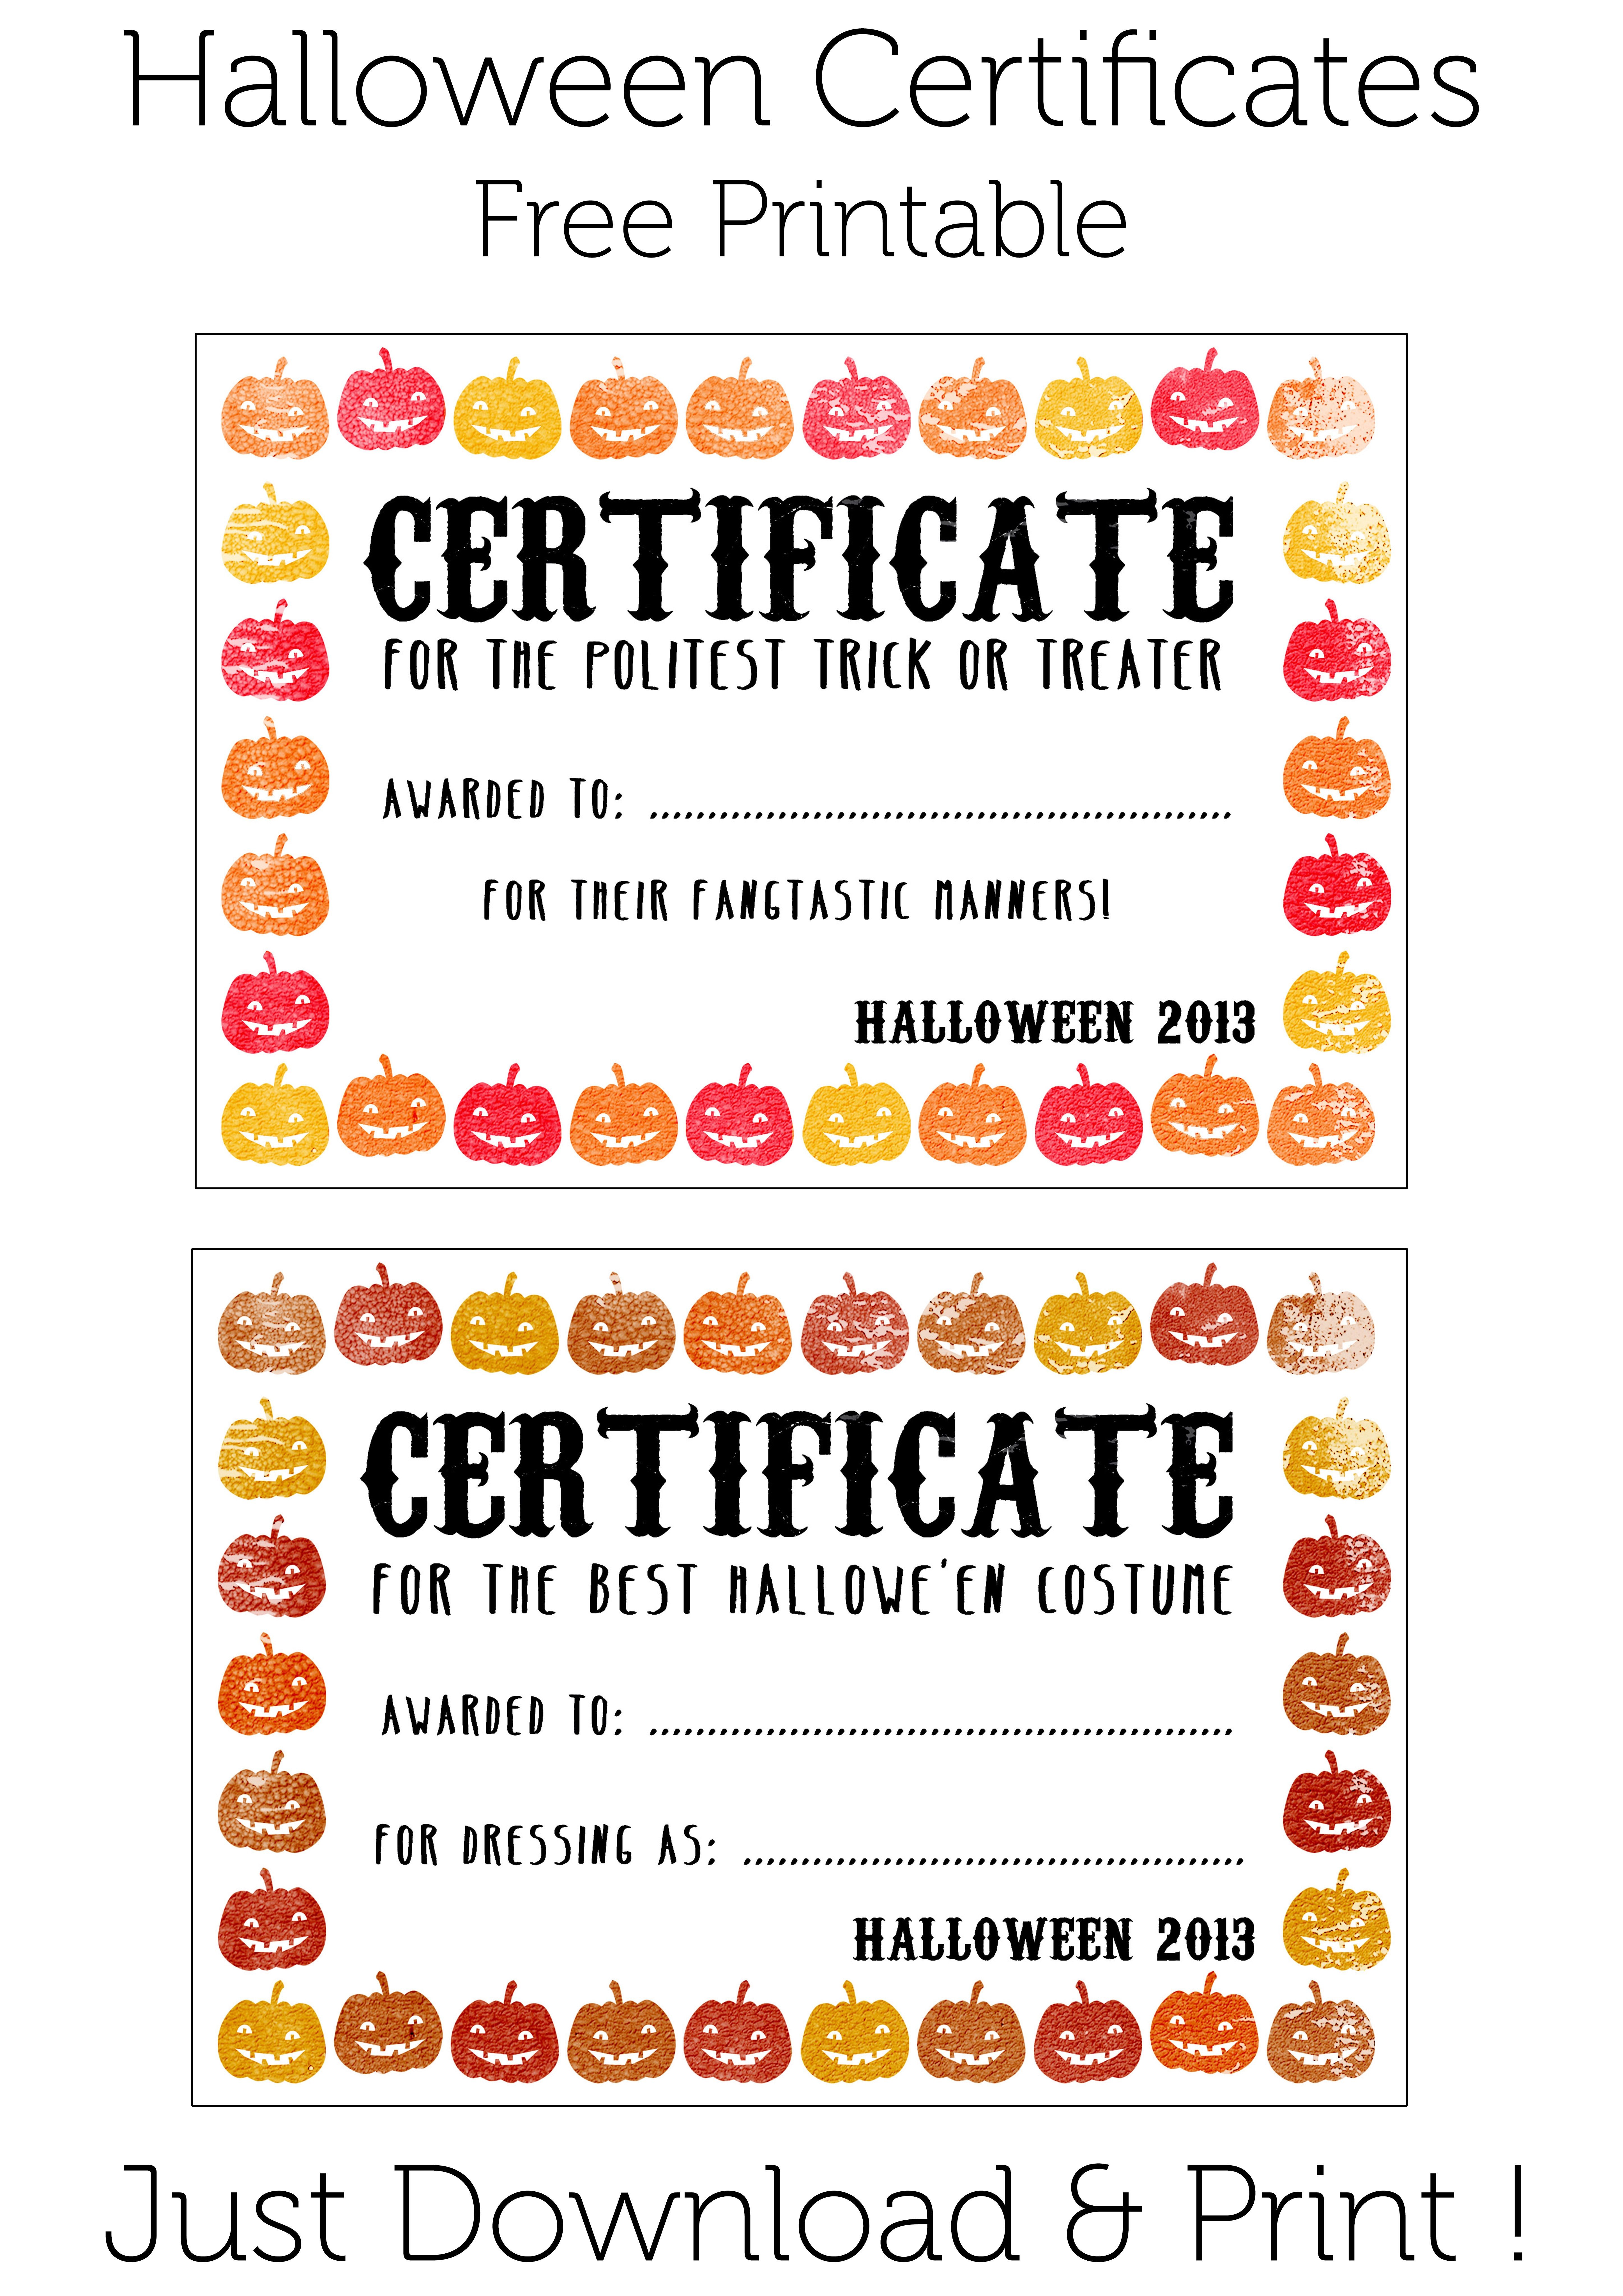 Halloween Certificates Give Them Out To Trick O Treaters As Well